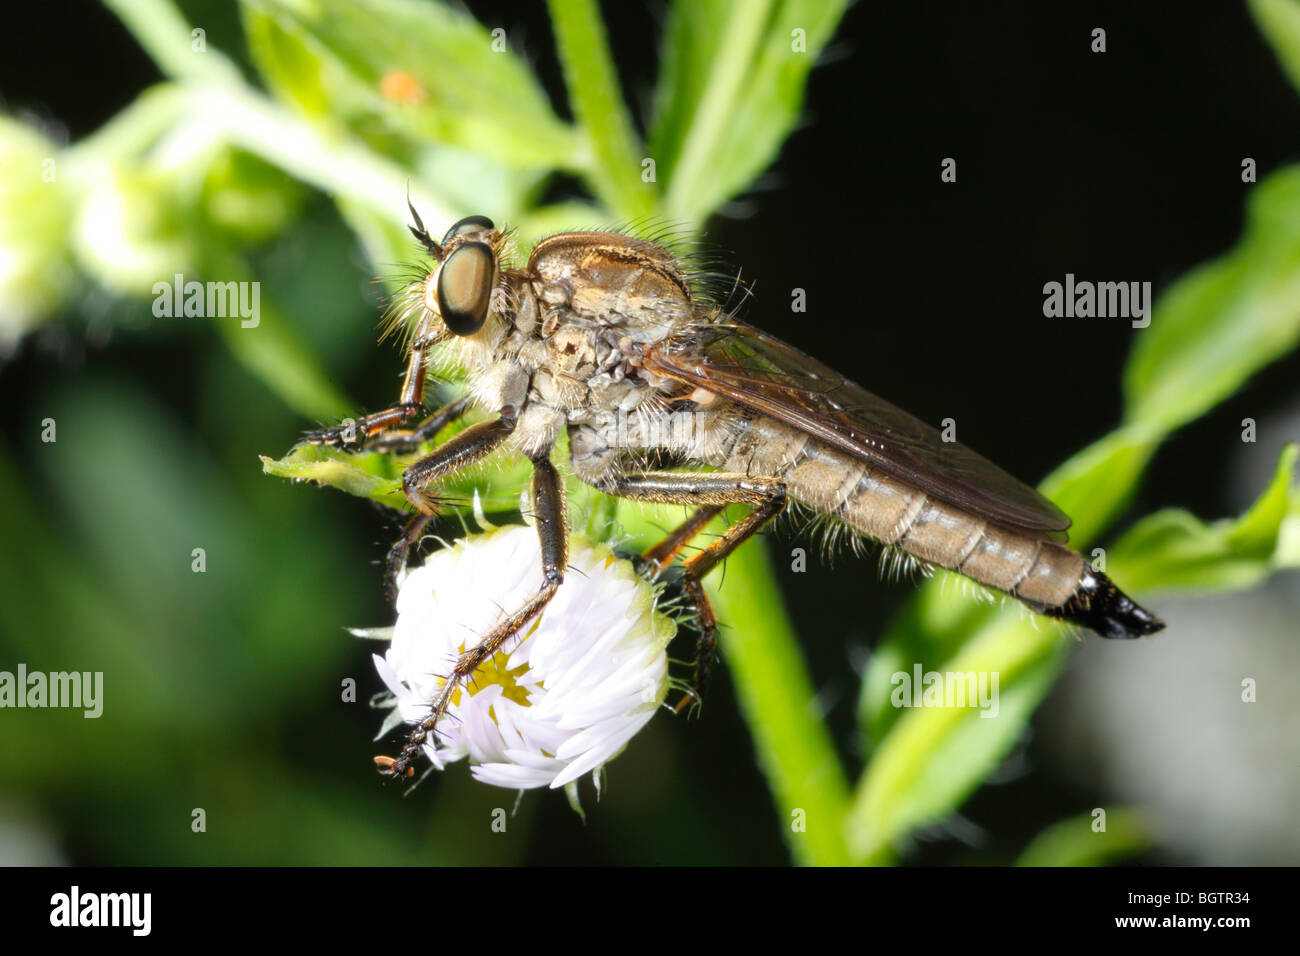 Robber Fly (Asilidae inconnu). Ariege Pyrenees, France. Banque D'Images